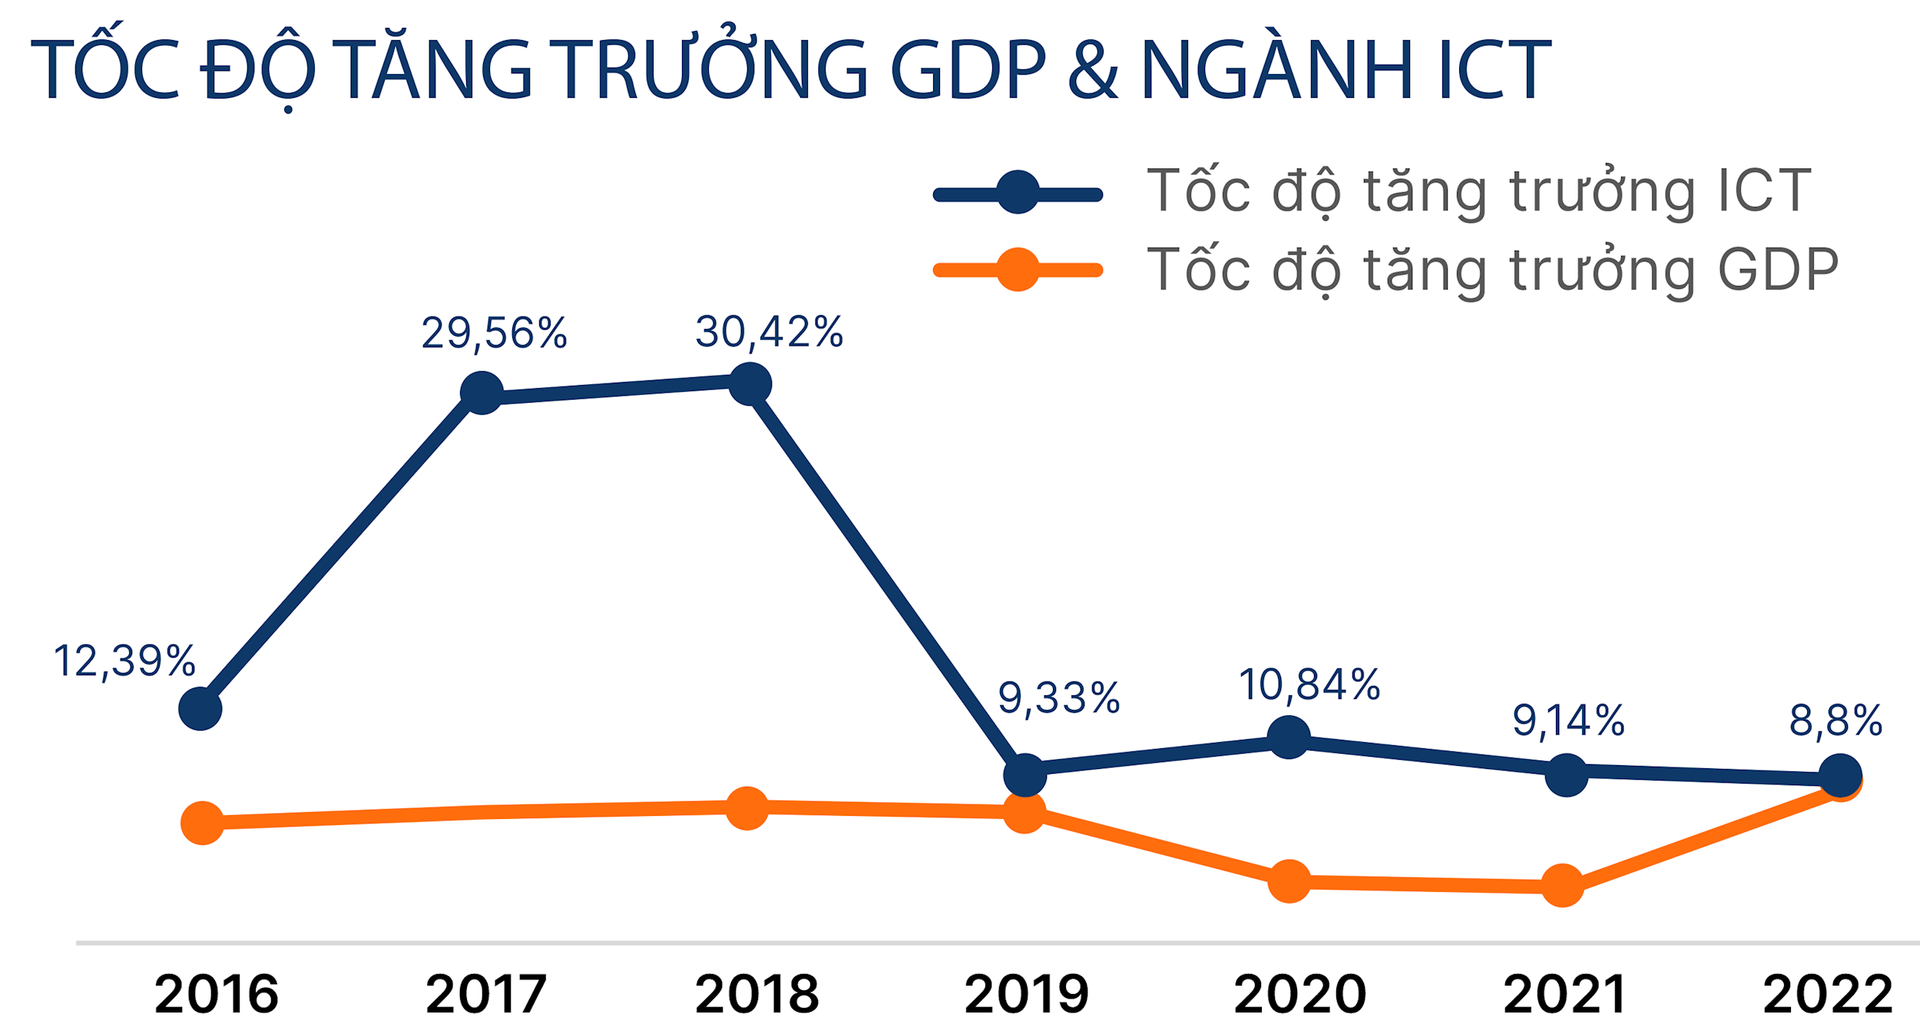 hinh-2-toc-do-tang-truong-gdp-nganh-ict-theo-bao-cao-thi-truong-it-viet-nam-topdev-quy-3-2023-1-.png